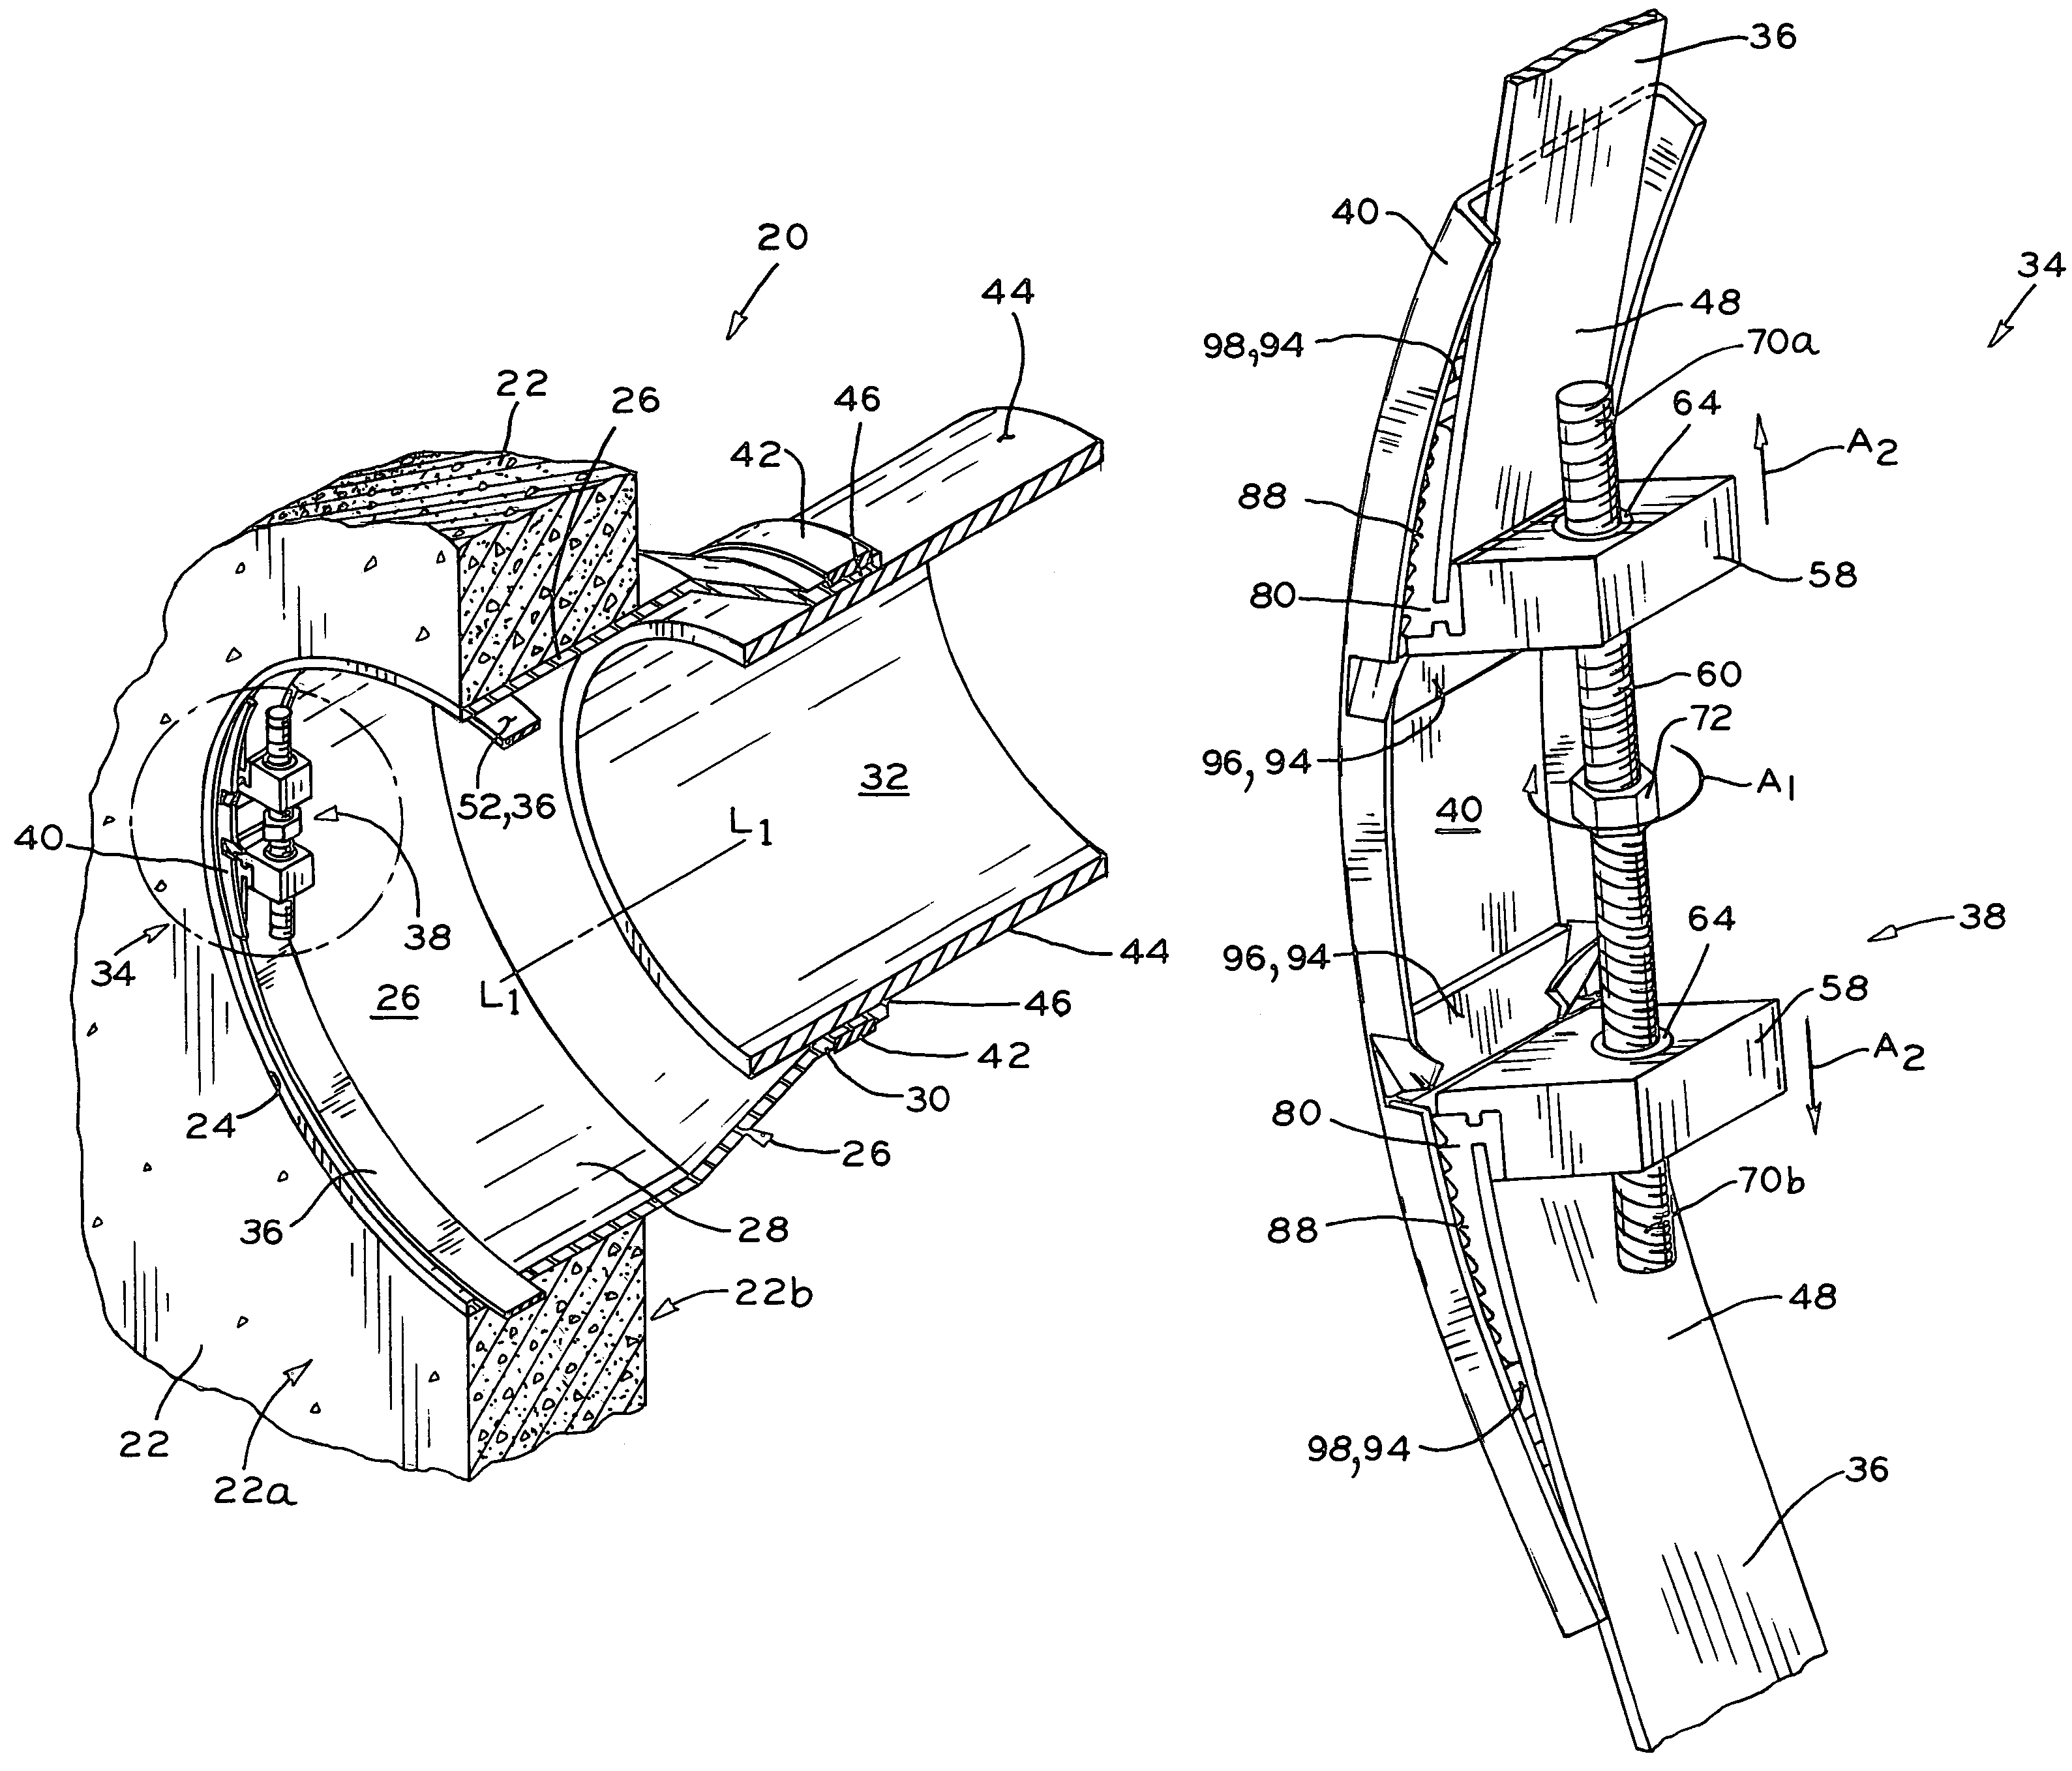 Expansion ring assembly with removable drive mechanism